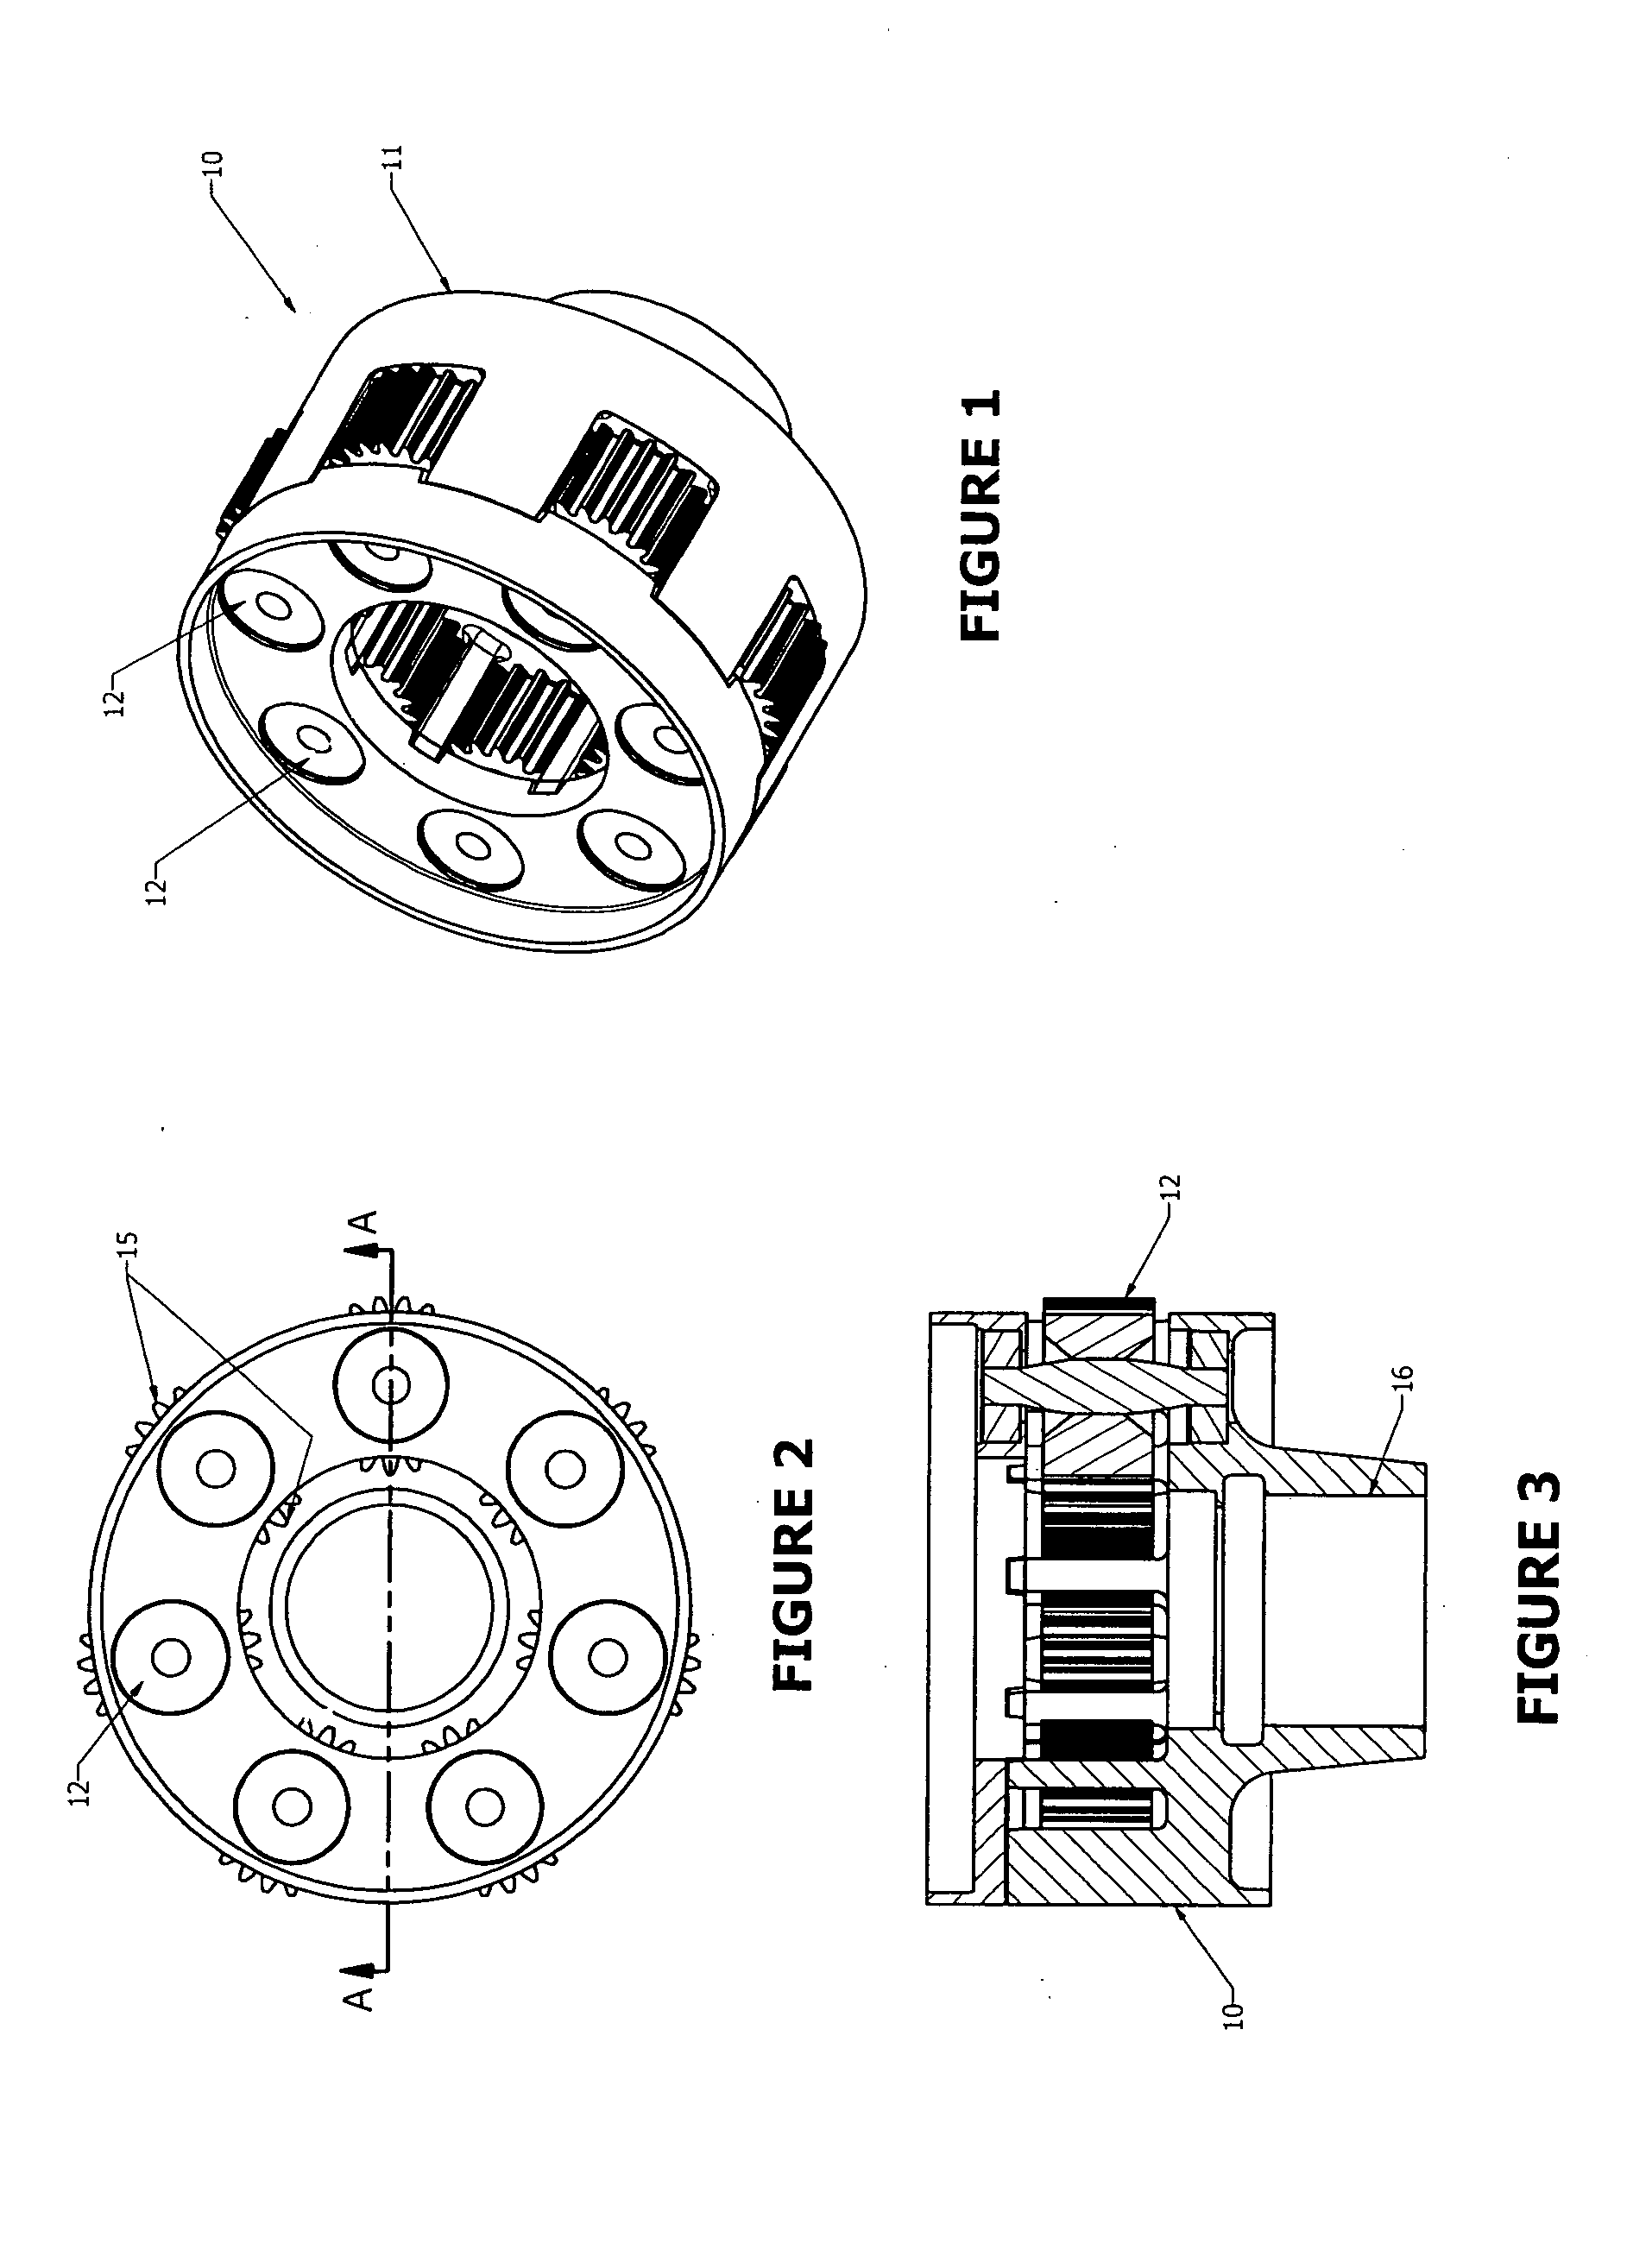 Gear assembly with asymmetric flex pin cross-reference to related applications